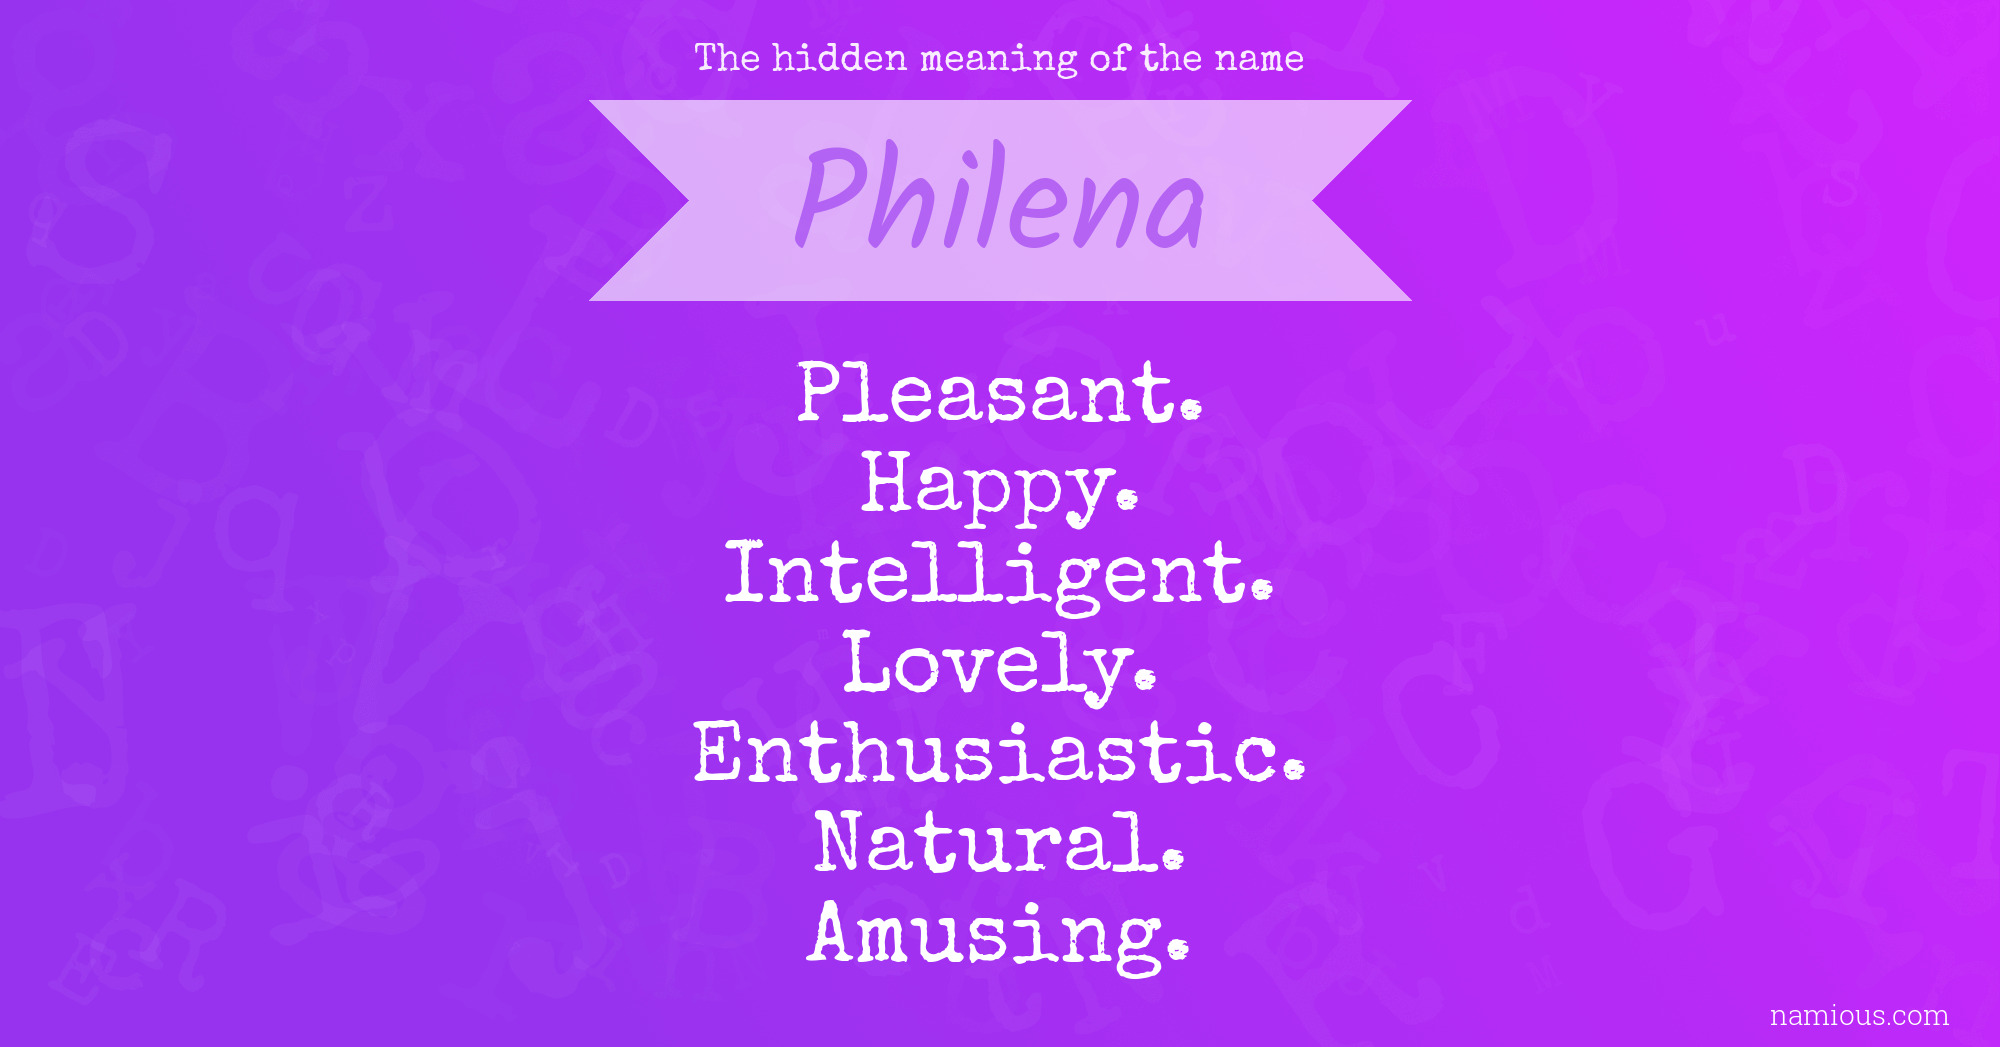 The hidden meaning of the name Philena